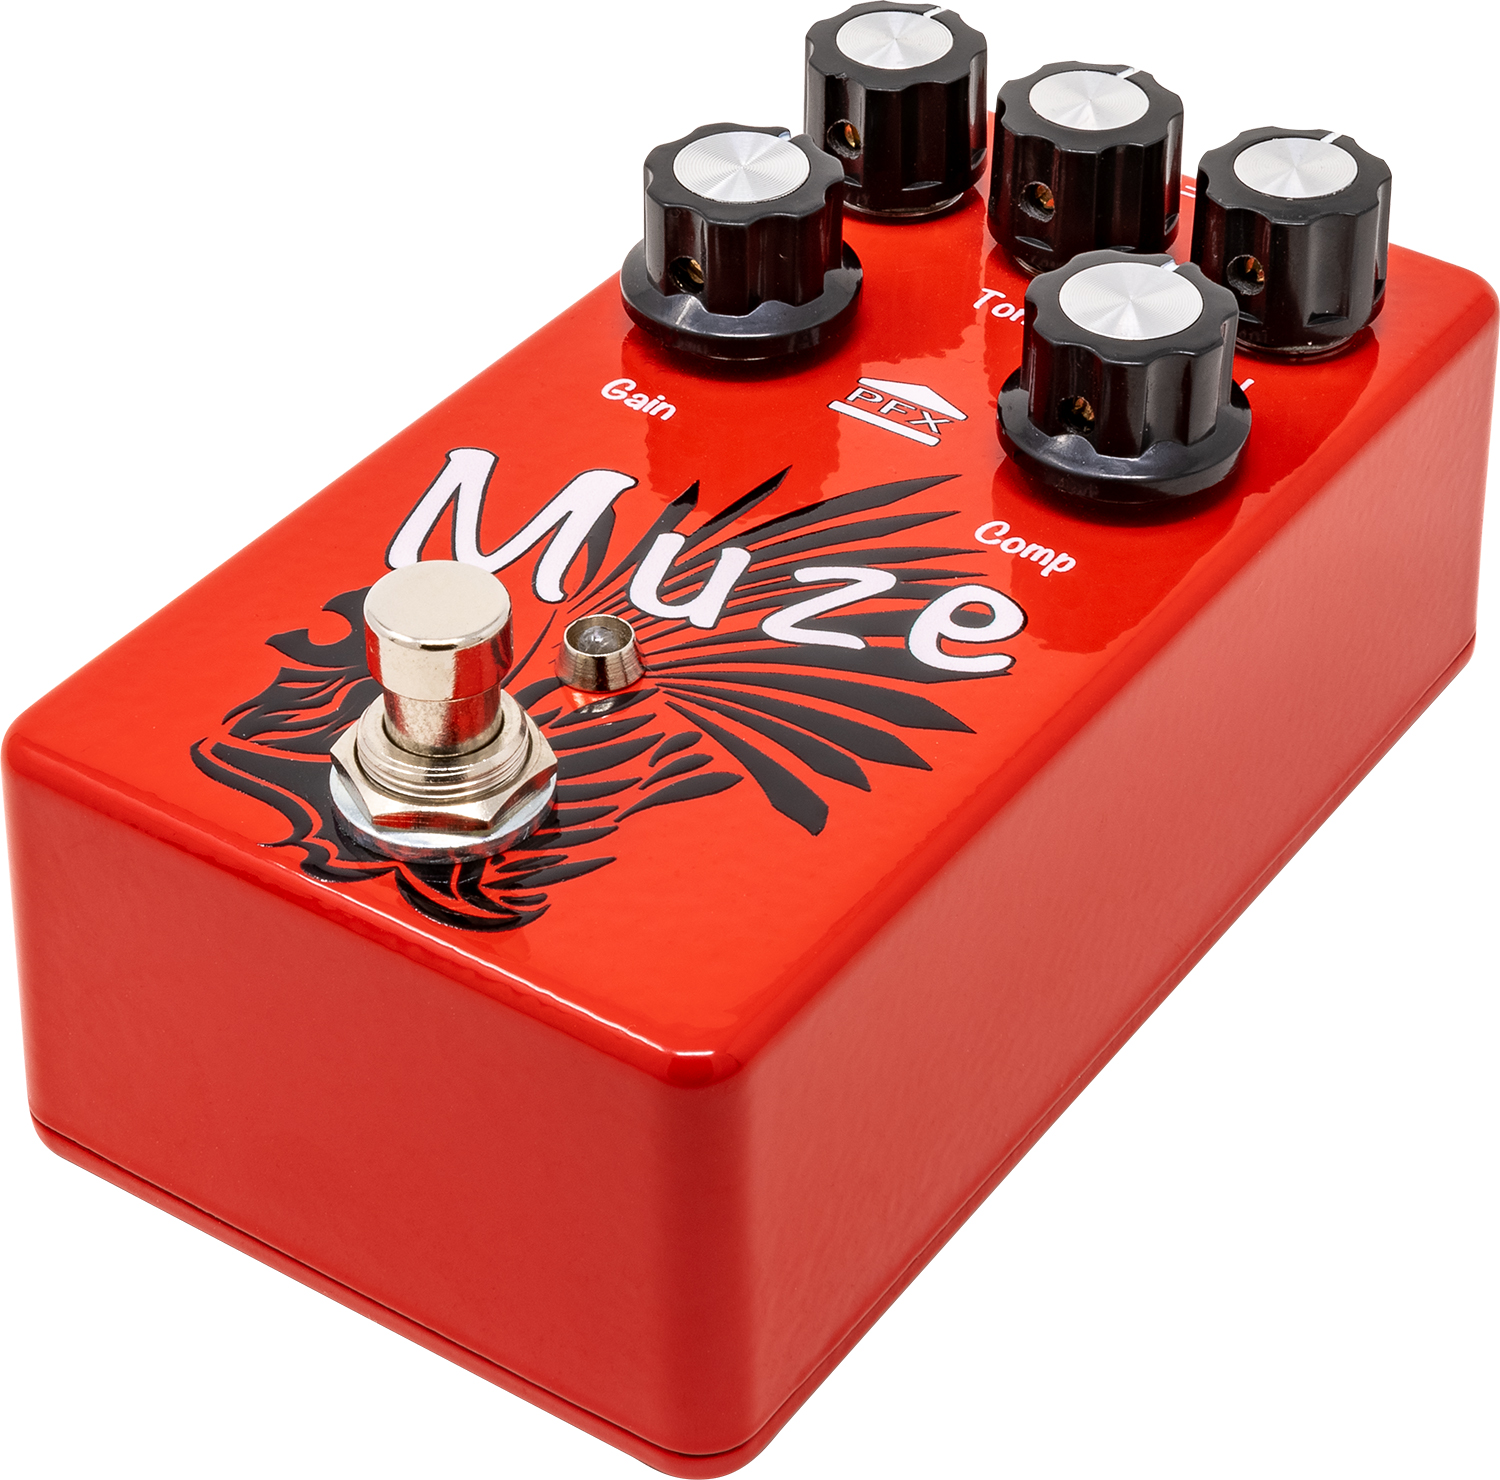 Pfx Circuits Muze Distortion - Overdrive, distortion & fuzz effect pedal - Variation 1